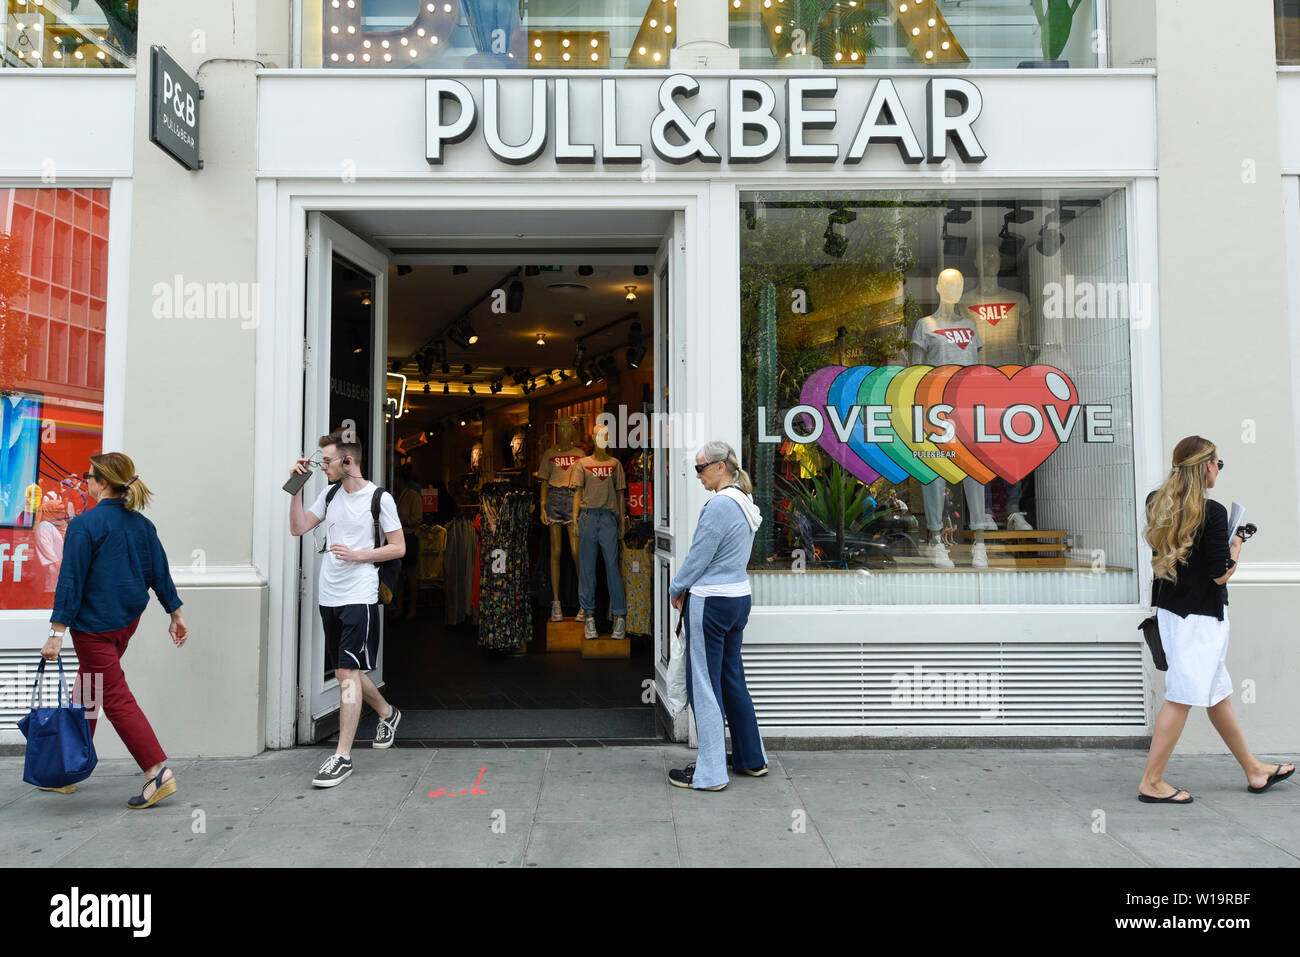 London, UK. 1 July 2019. The Pull & Bear store in Oxford Street is one of  many stores in the capital's West End whose exteriors are decorated in  rainbow colours in support